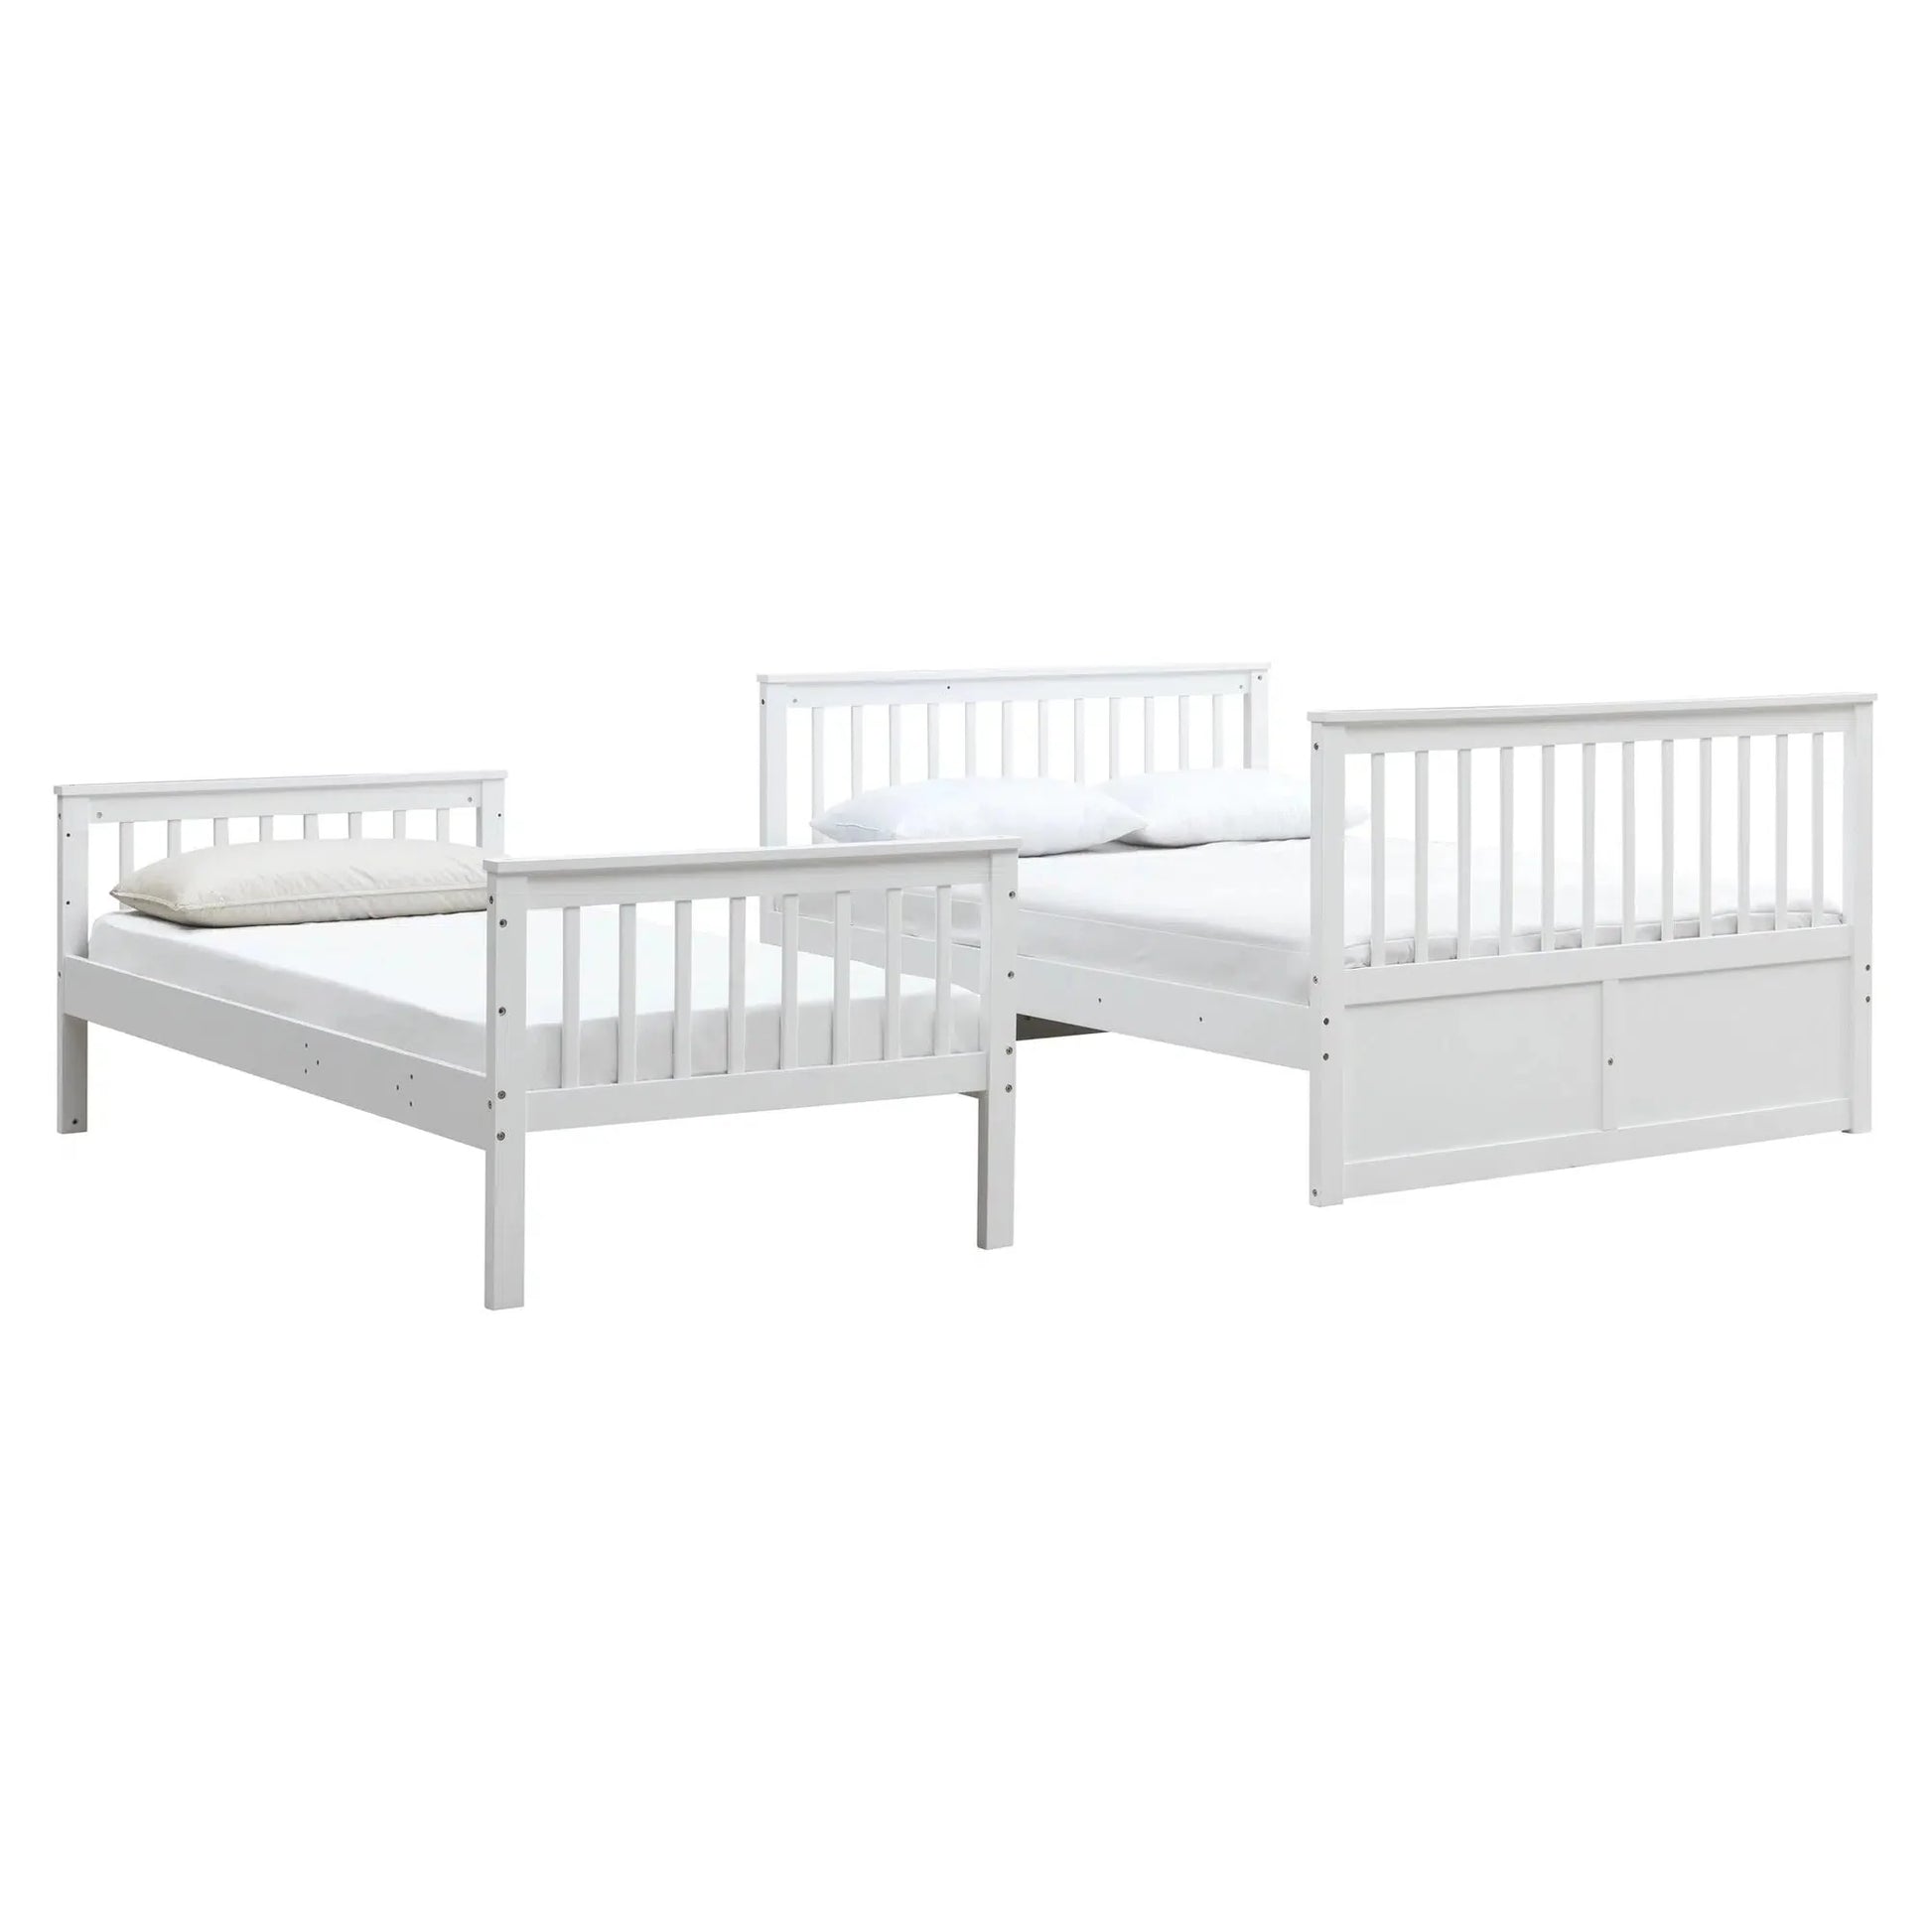 Seattle Single over Double Timber Bunk Bed in White-Sleep Doctor